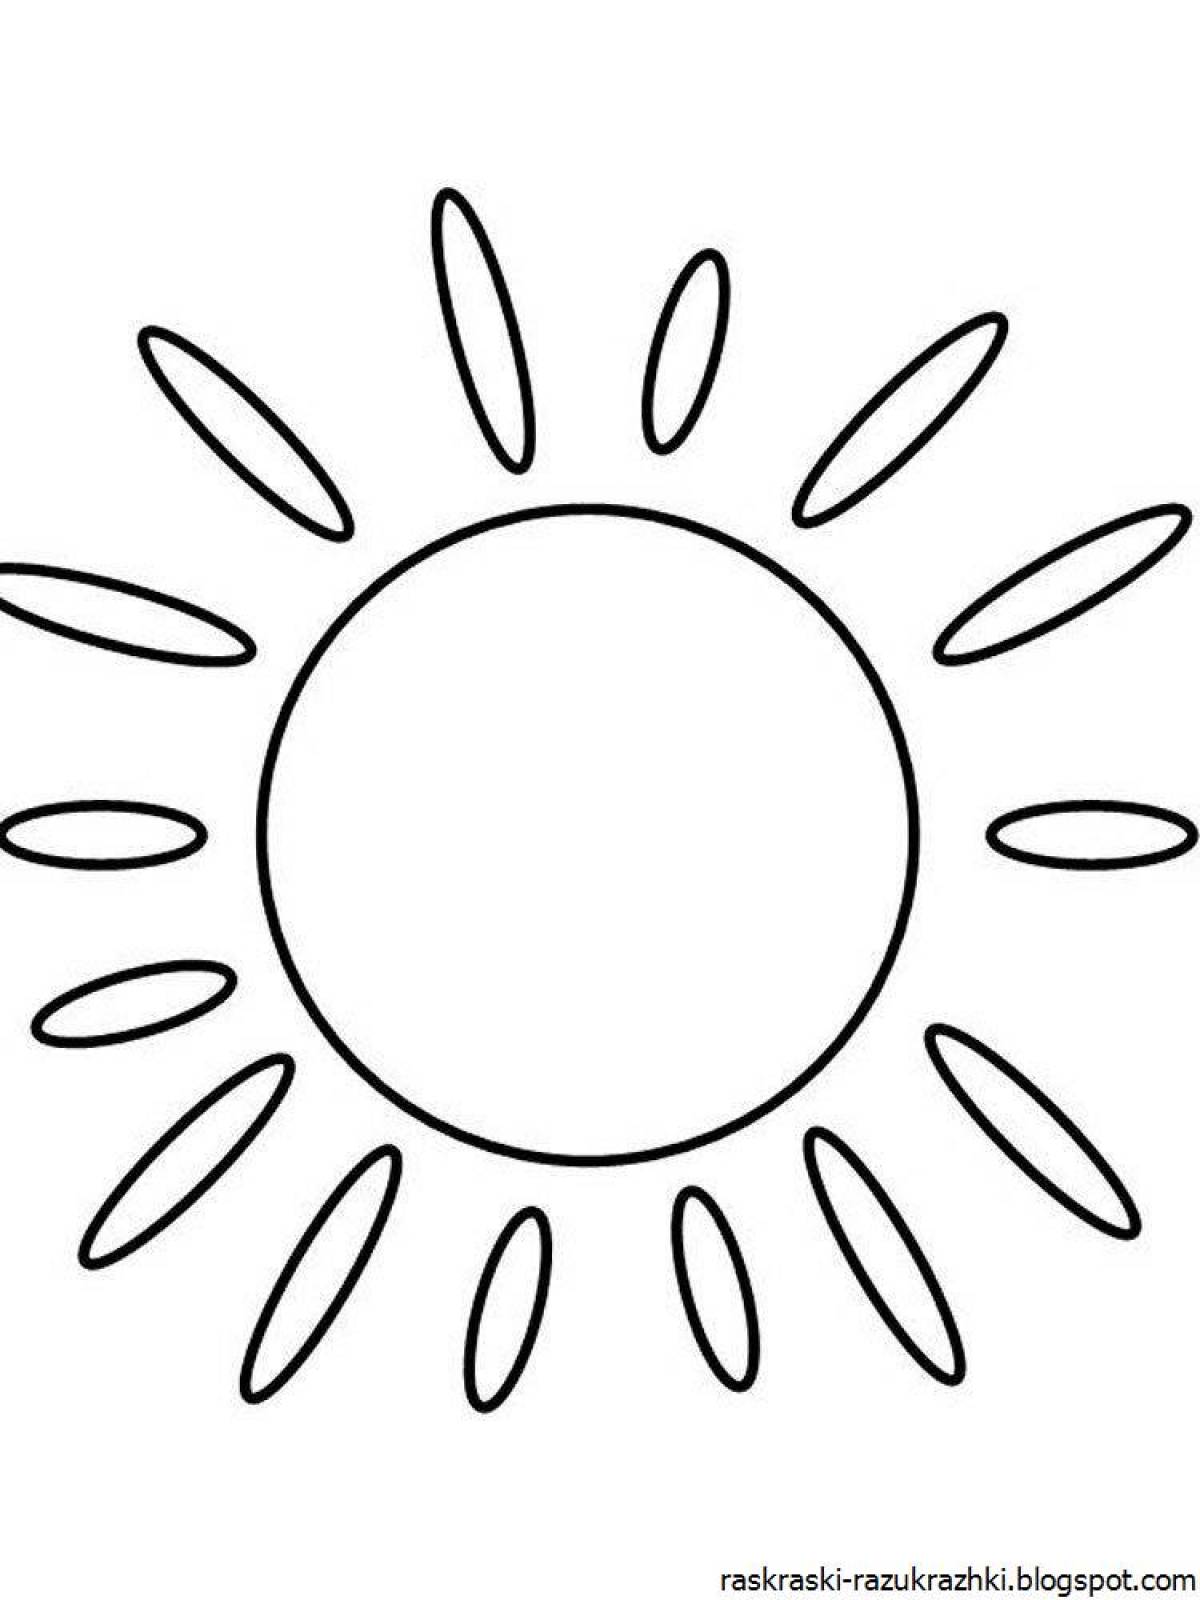 Awesome sun coloring book for kids